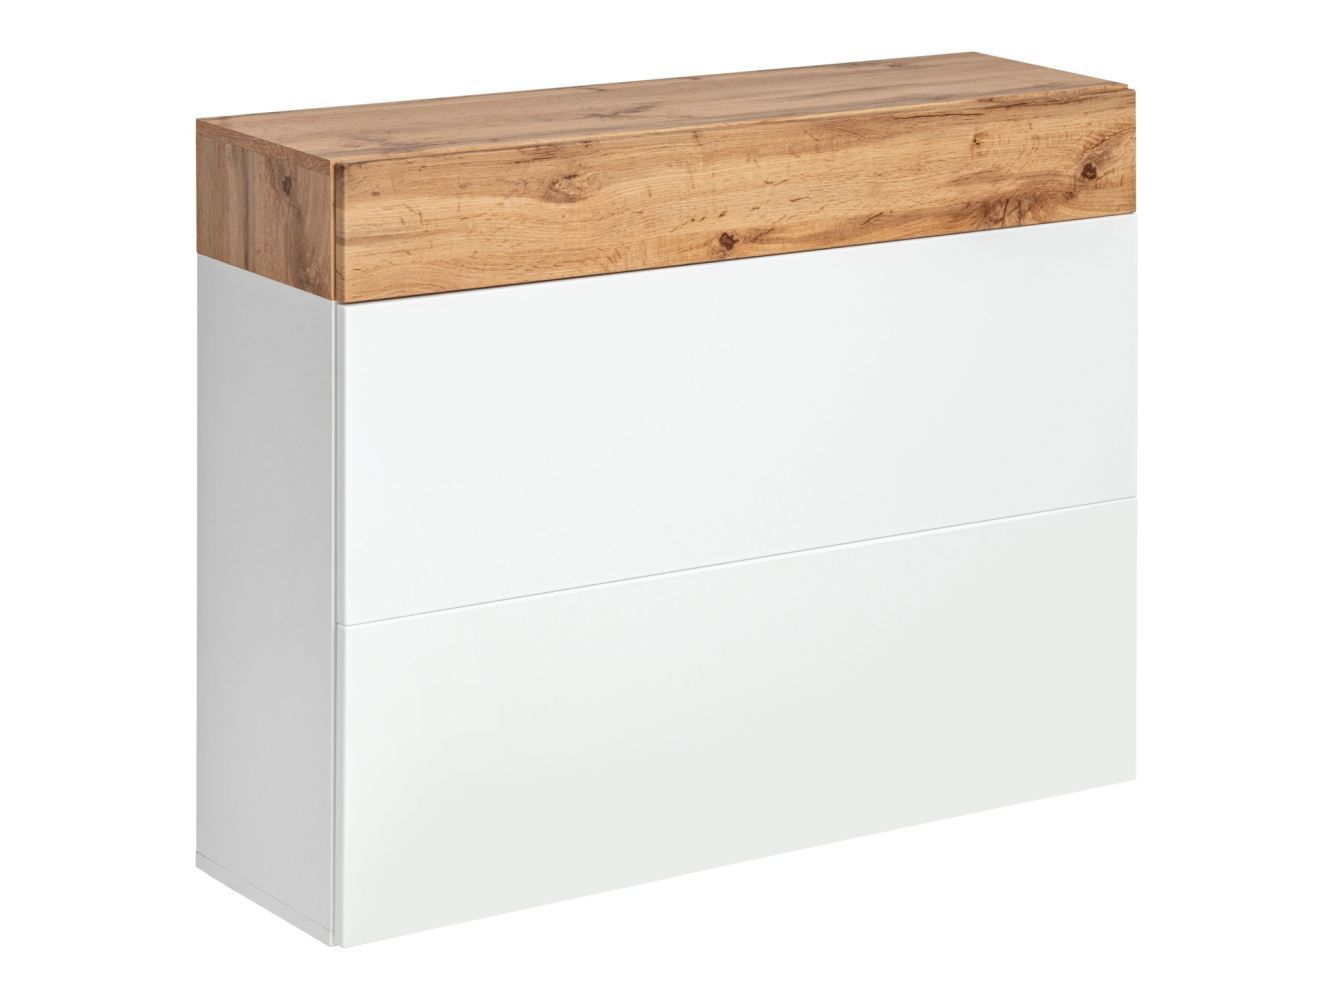 Shoe rack with two flaps Pollestad 14, Colour: Wotan Oak / White - Measurements: 80 x 100 x 30 cm (H x W x D), with one drawer.